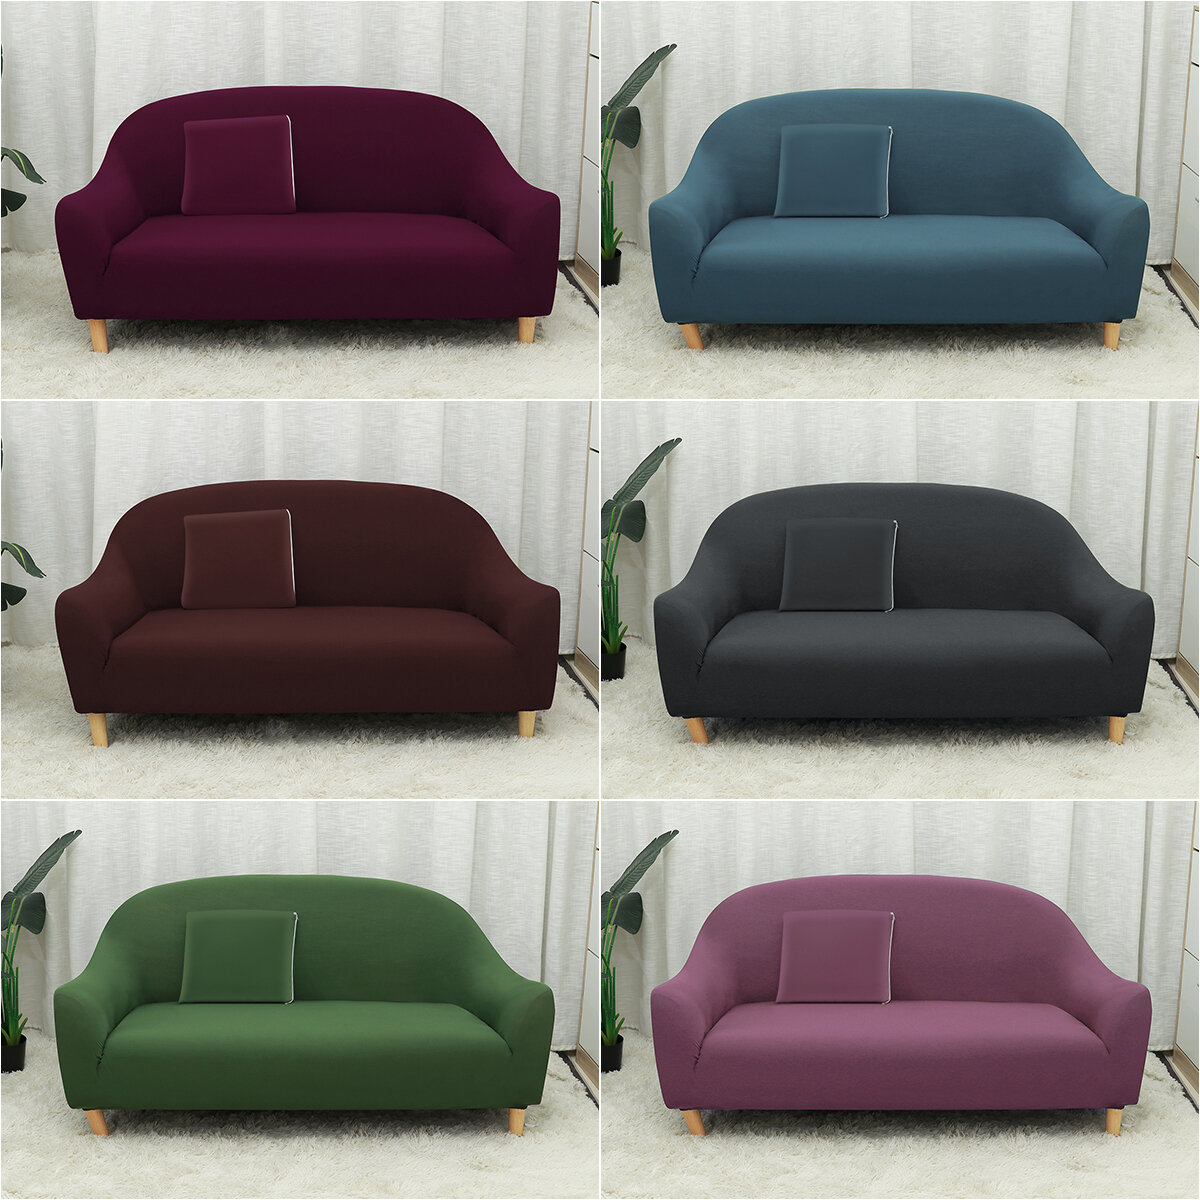 Image of Large Sofa Cover Elastic Polyester Three-Seat Machine-Washable Sofa Cover For Home Office Decoration